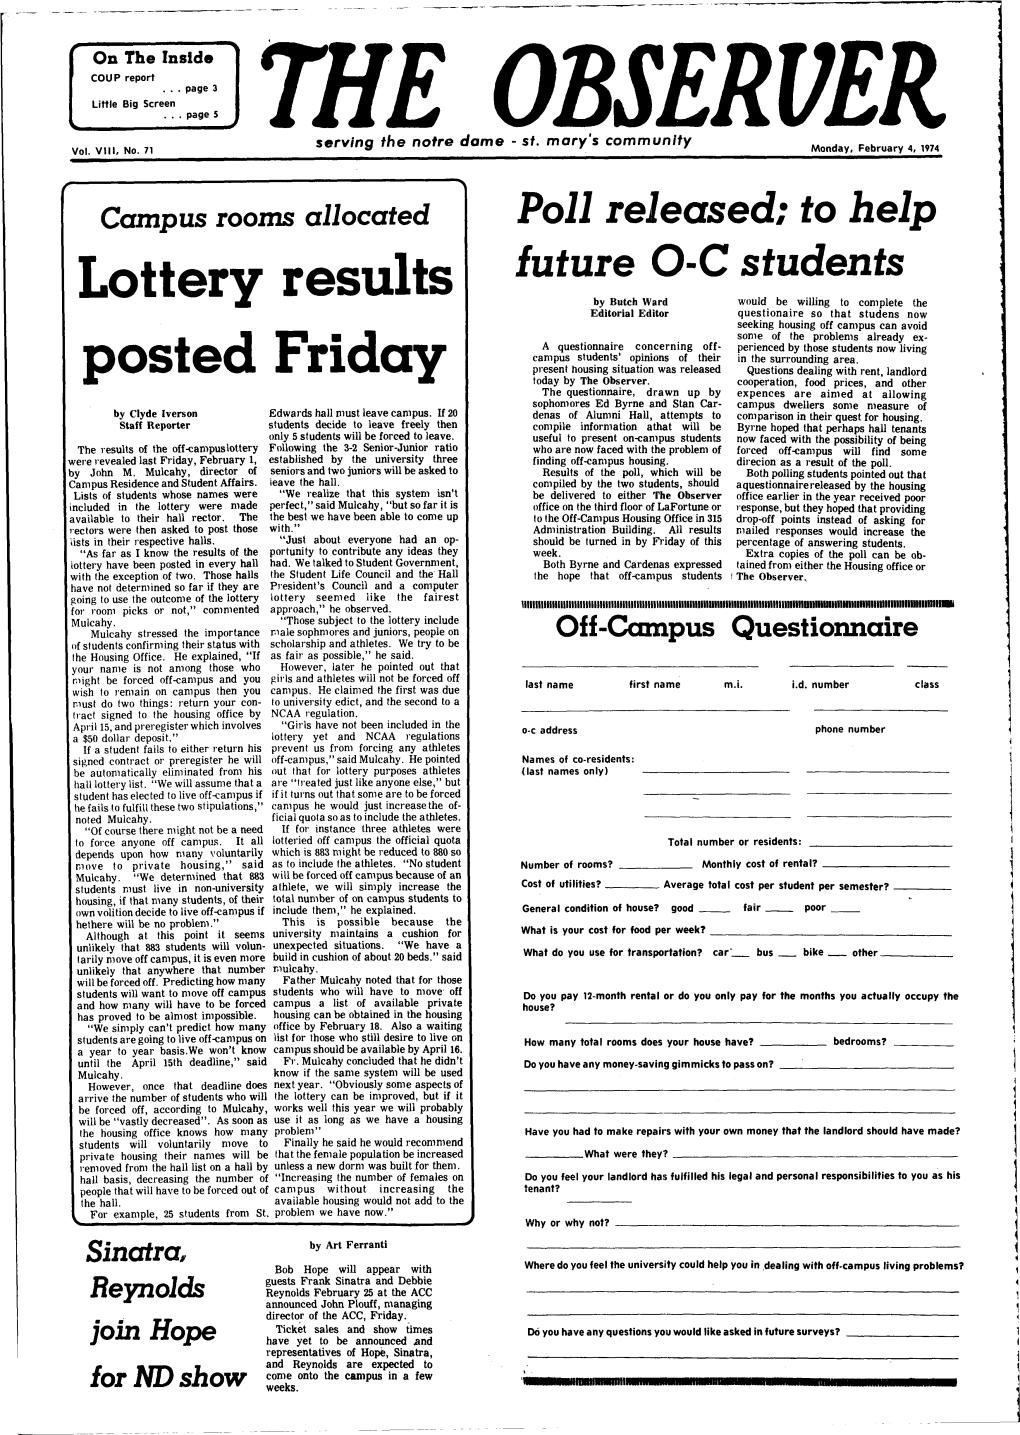 Lottery Results Posted Friday